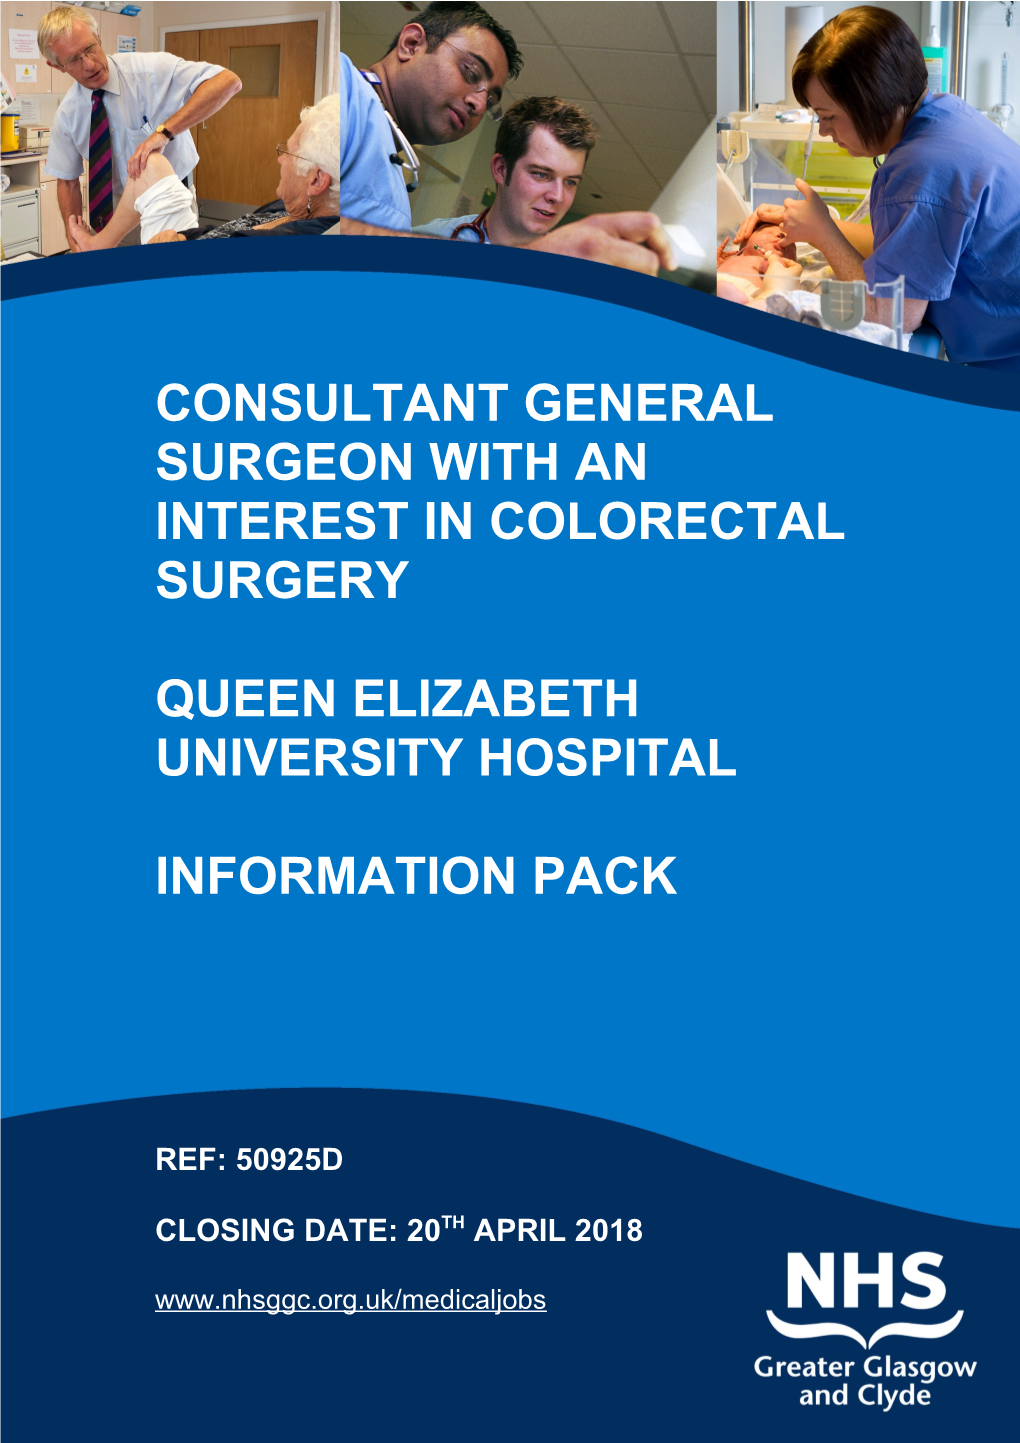 CONSULTANT General SURGEON with an INTEREST in Colorectal Surgery